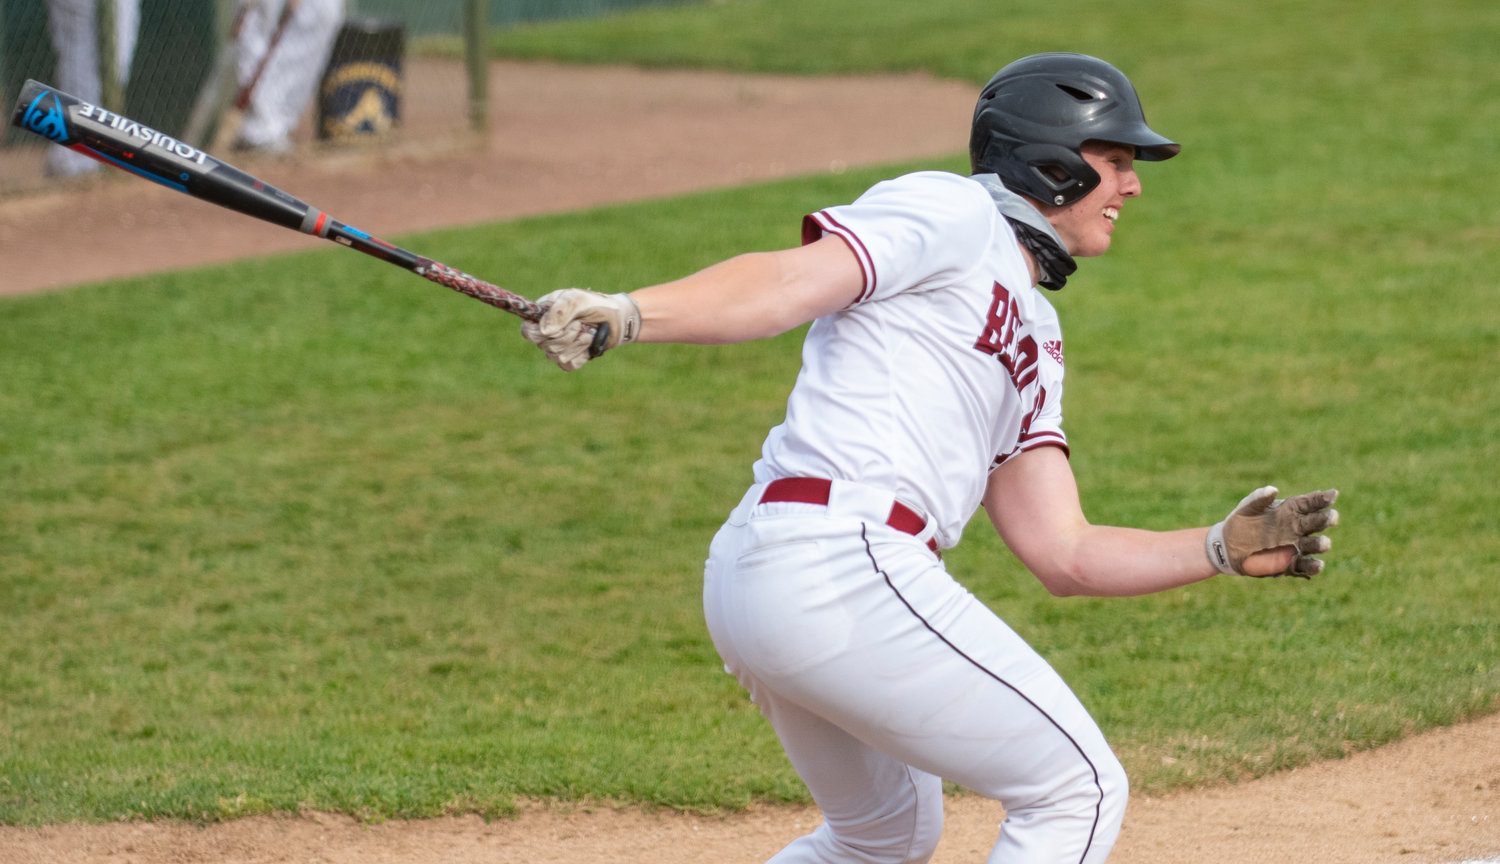 W.F. West catcher Drew Reynolds connects on an Aberdeen pitch on Friday.